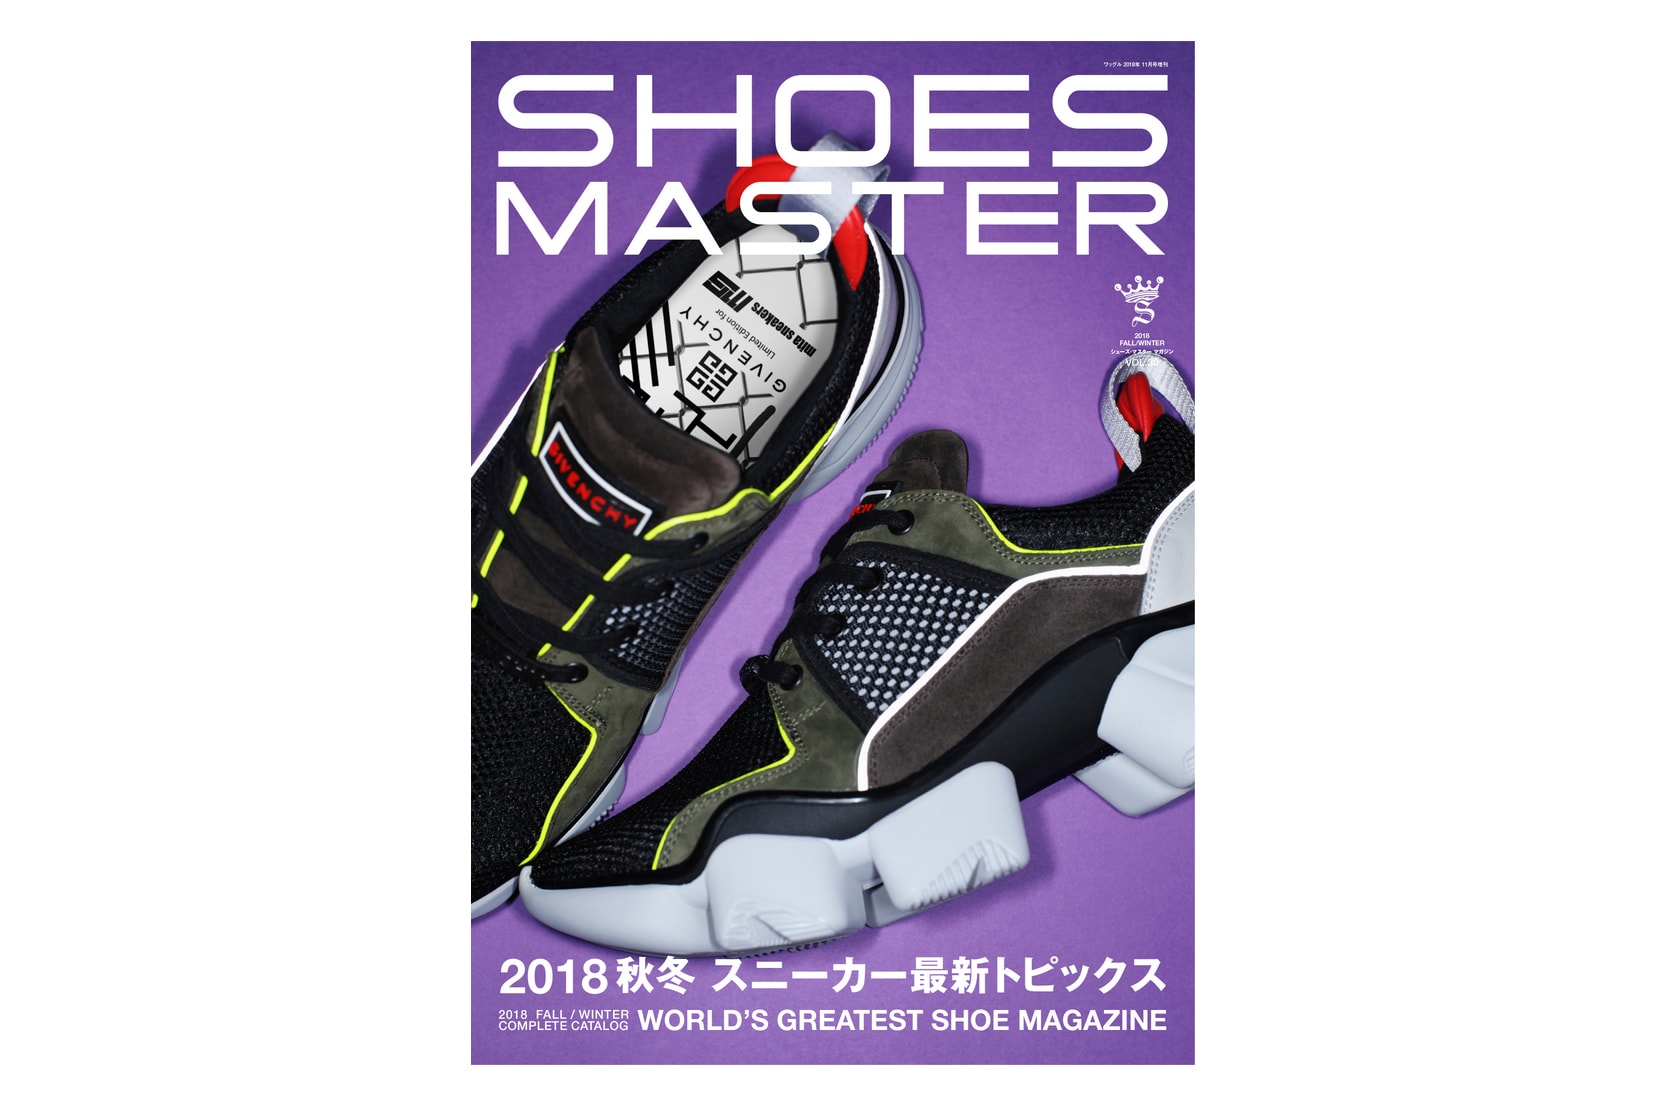 《SHOES MASTER》最新一期揭示 Givenchy x mita sneakers 全新聯乘鞋款